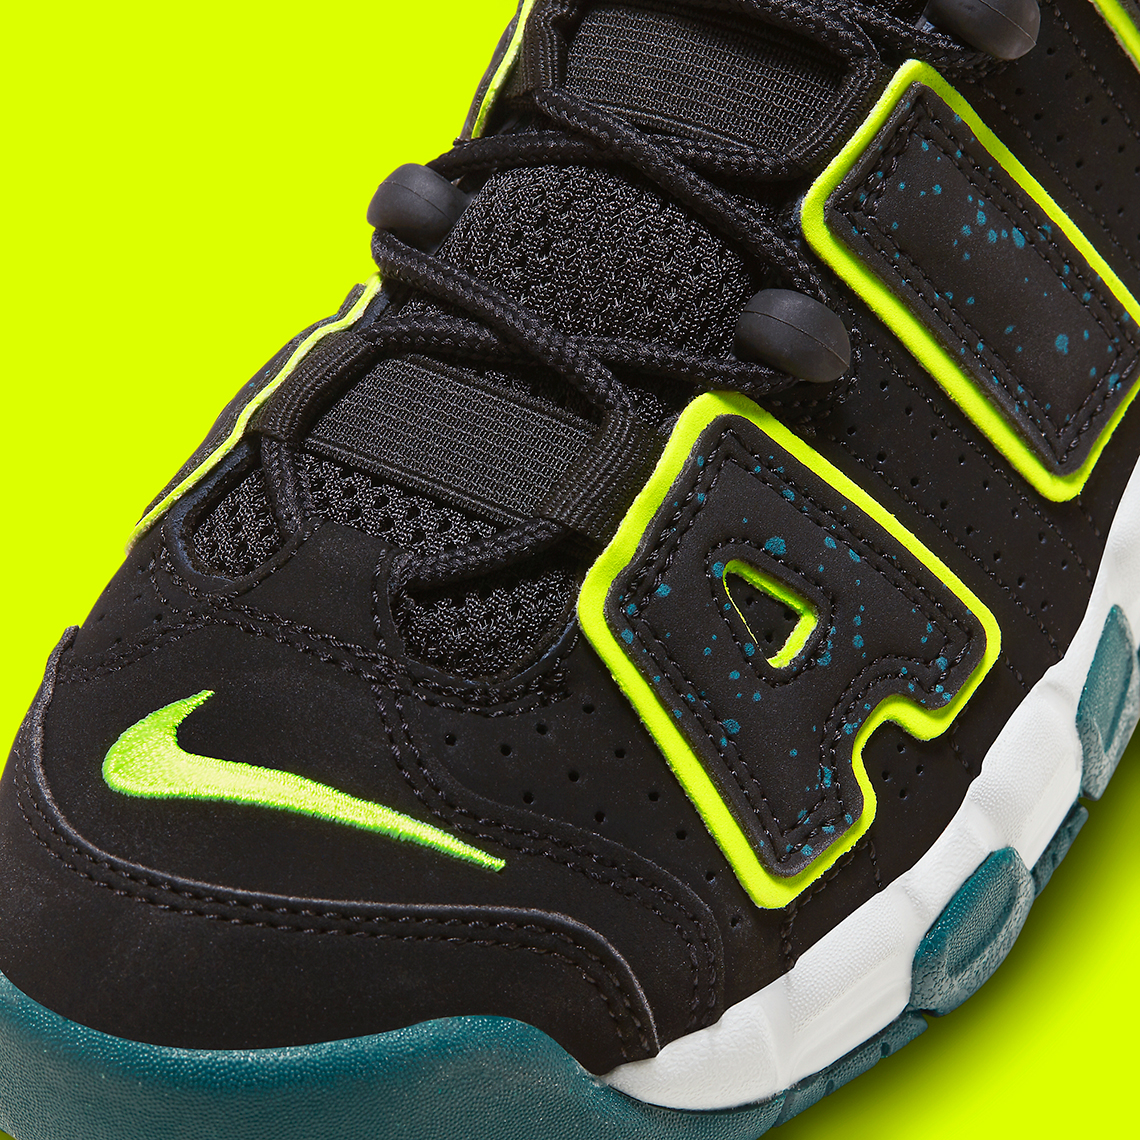 Nike Air More Uptempo Gs Black Teal Volt Dz2809 001 Release Date 7